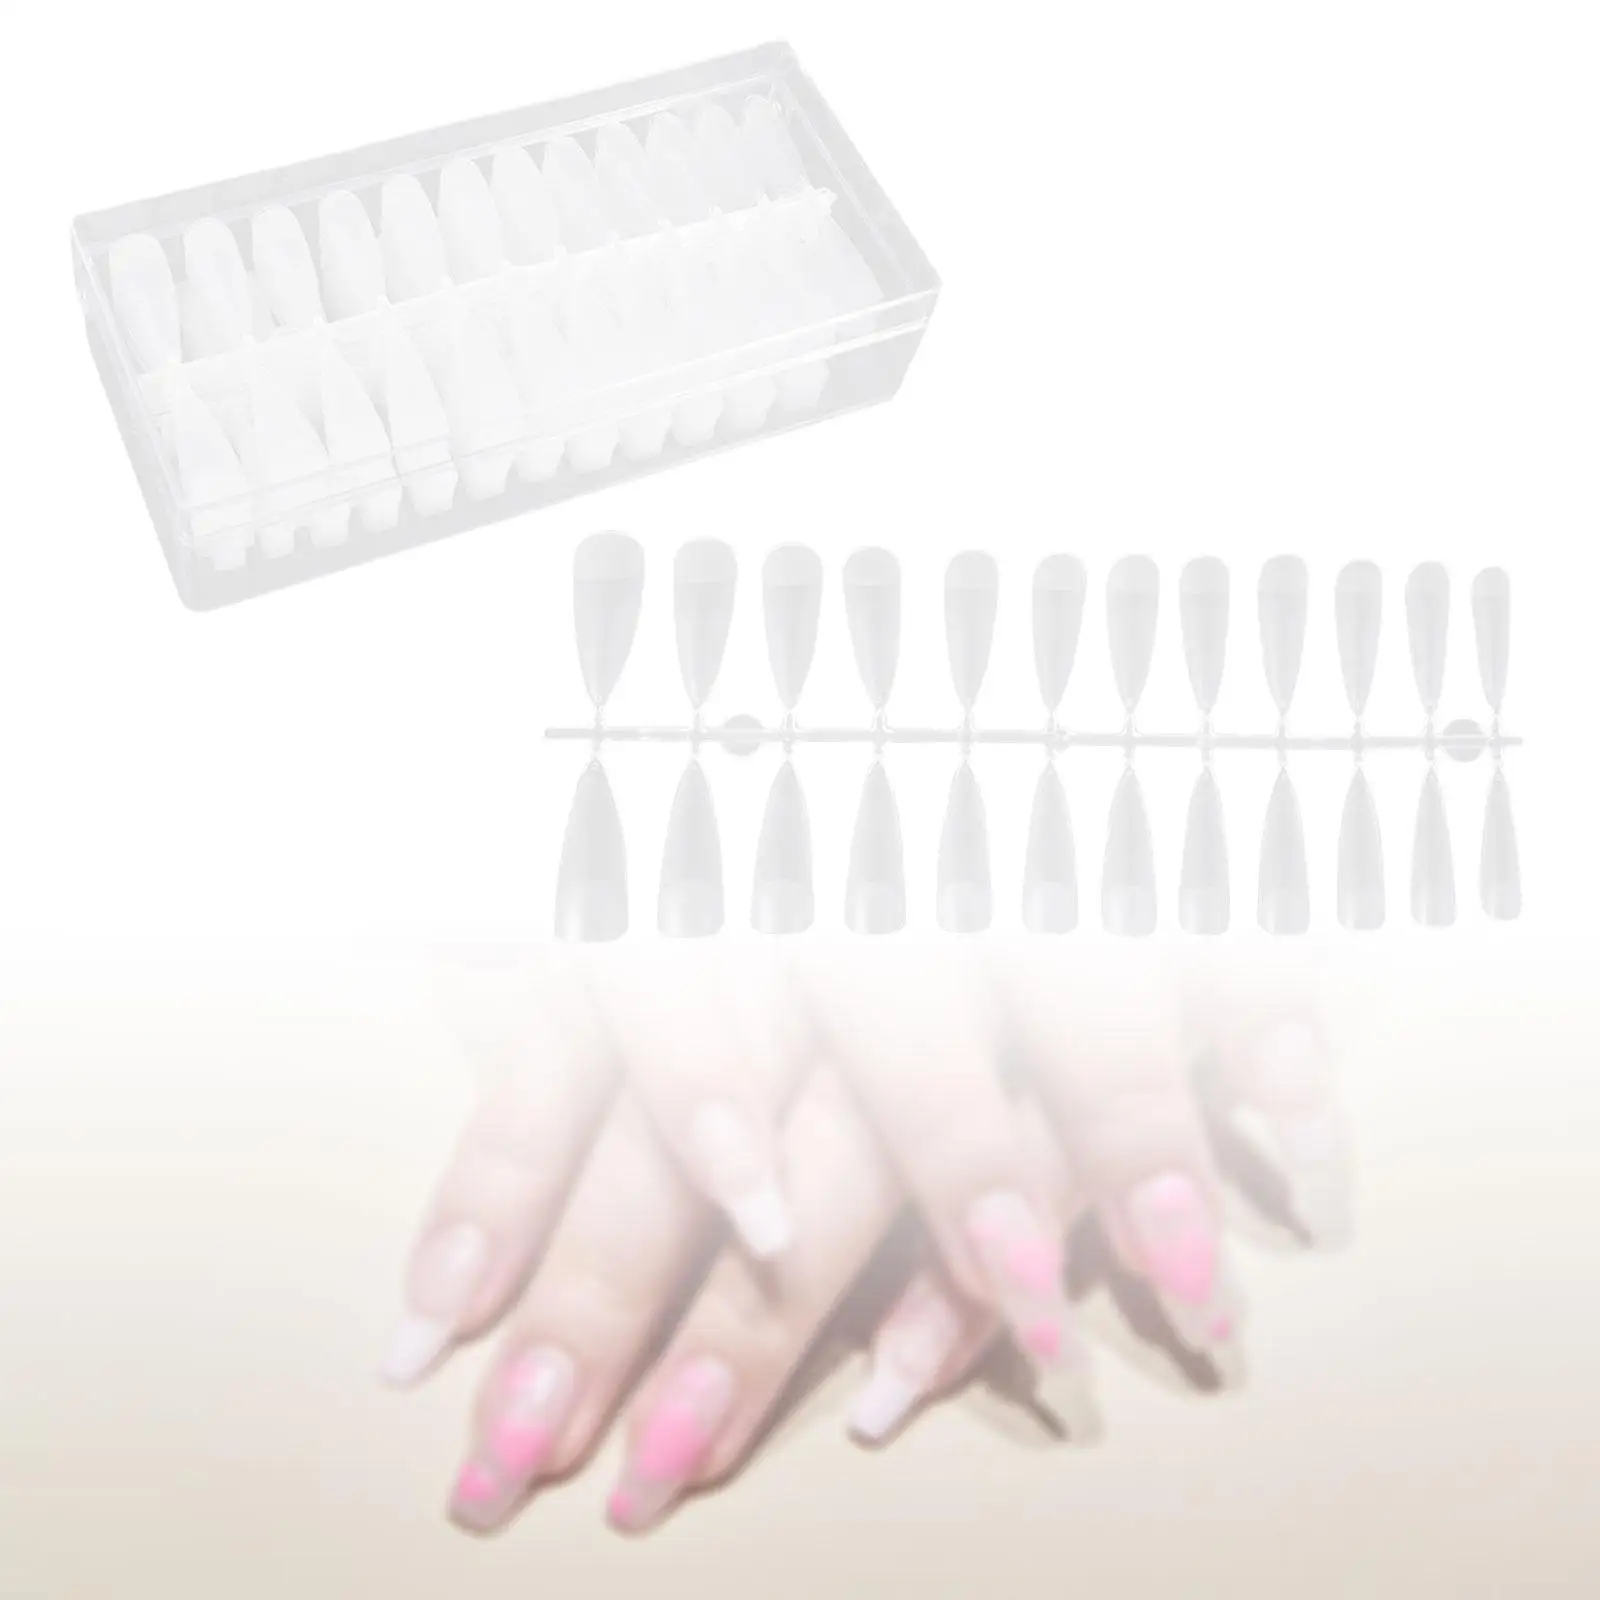 A pack of 240 Gel Nail Tips Clear for Soak Off Nail Extensions Fake Gel Nail Tips for Home Gift